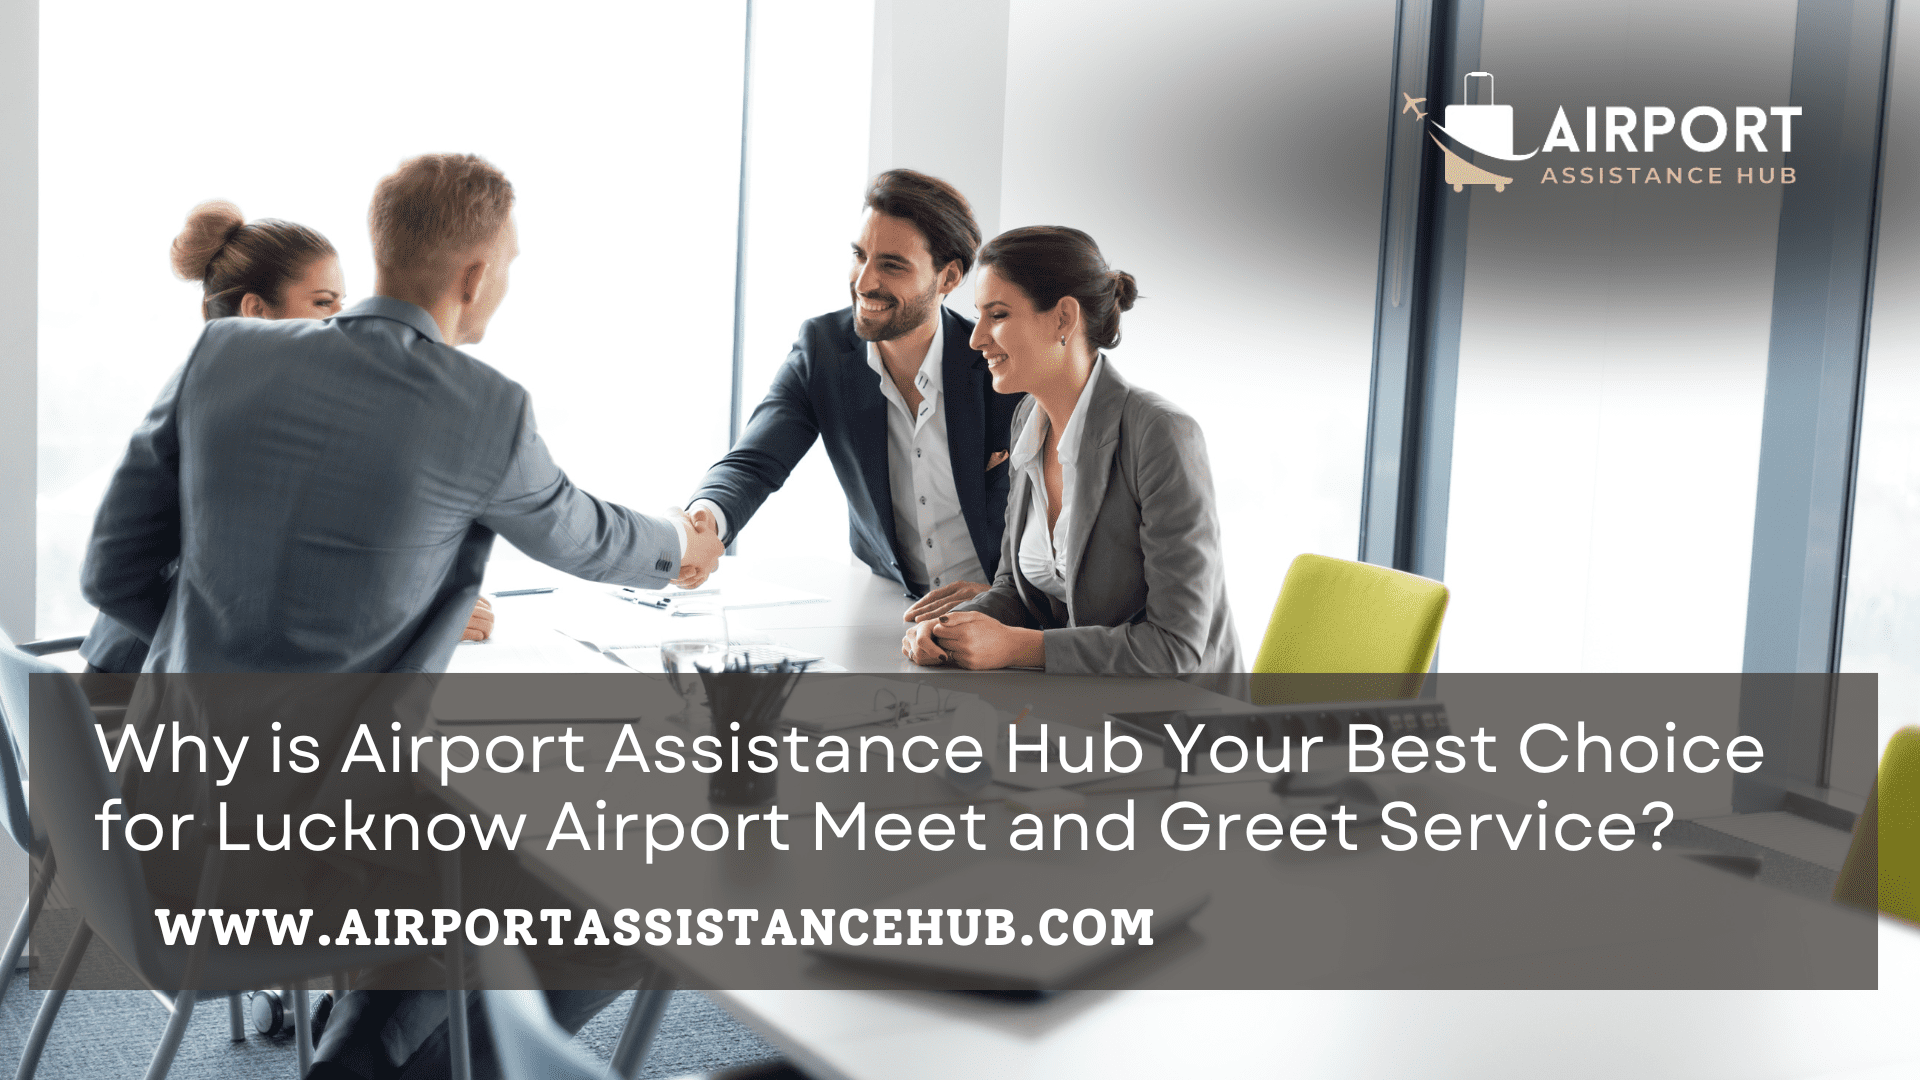 Lucknow Airport Meet and Greet Service